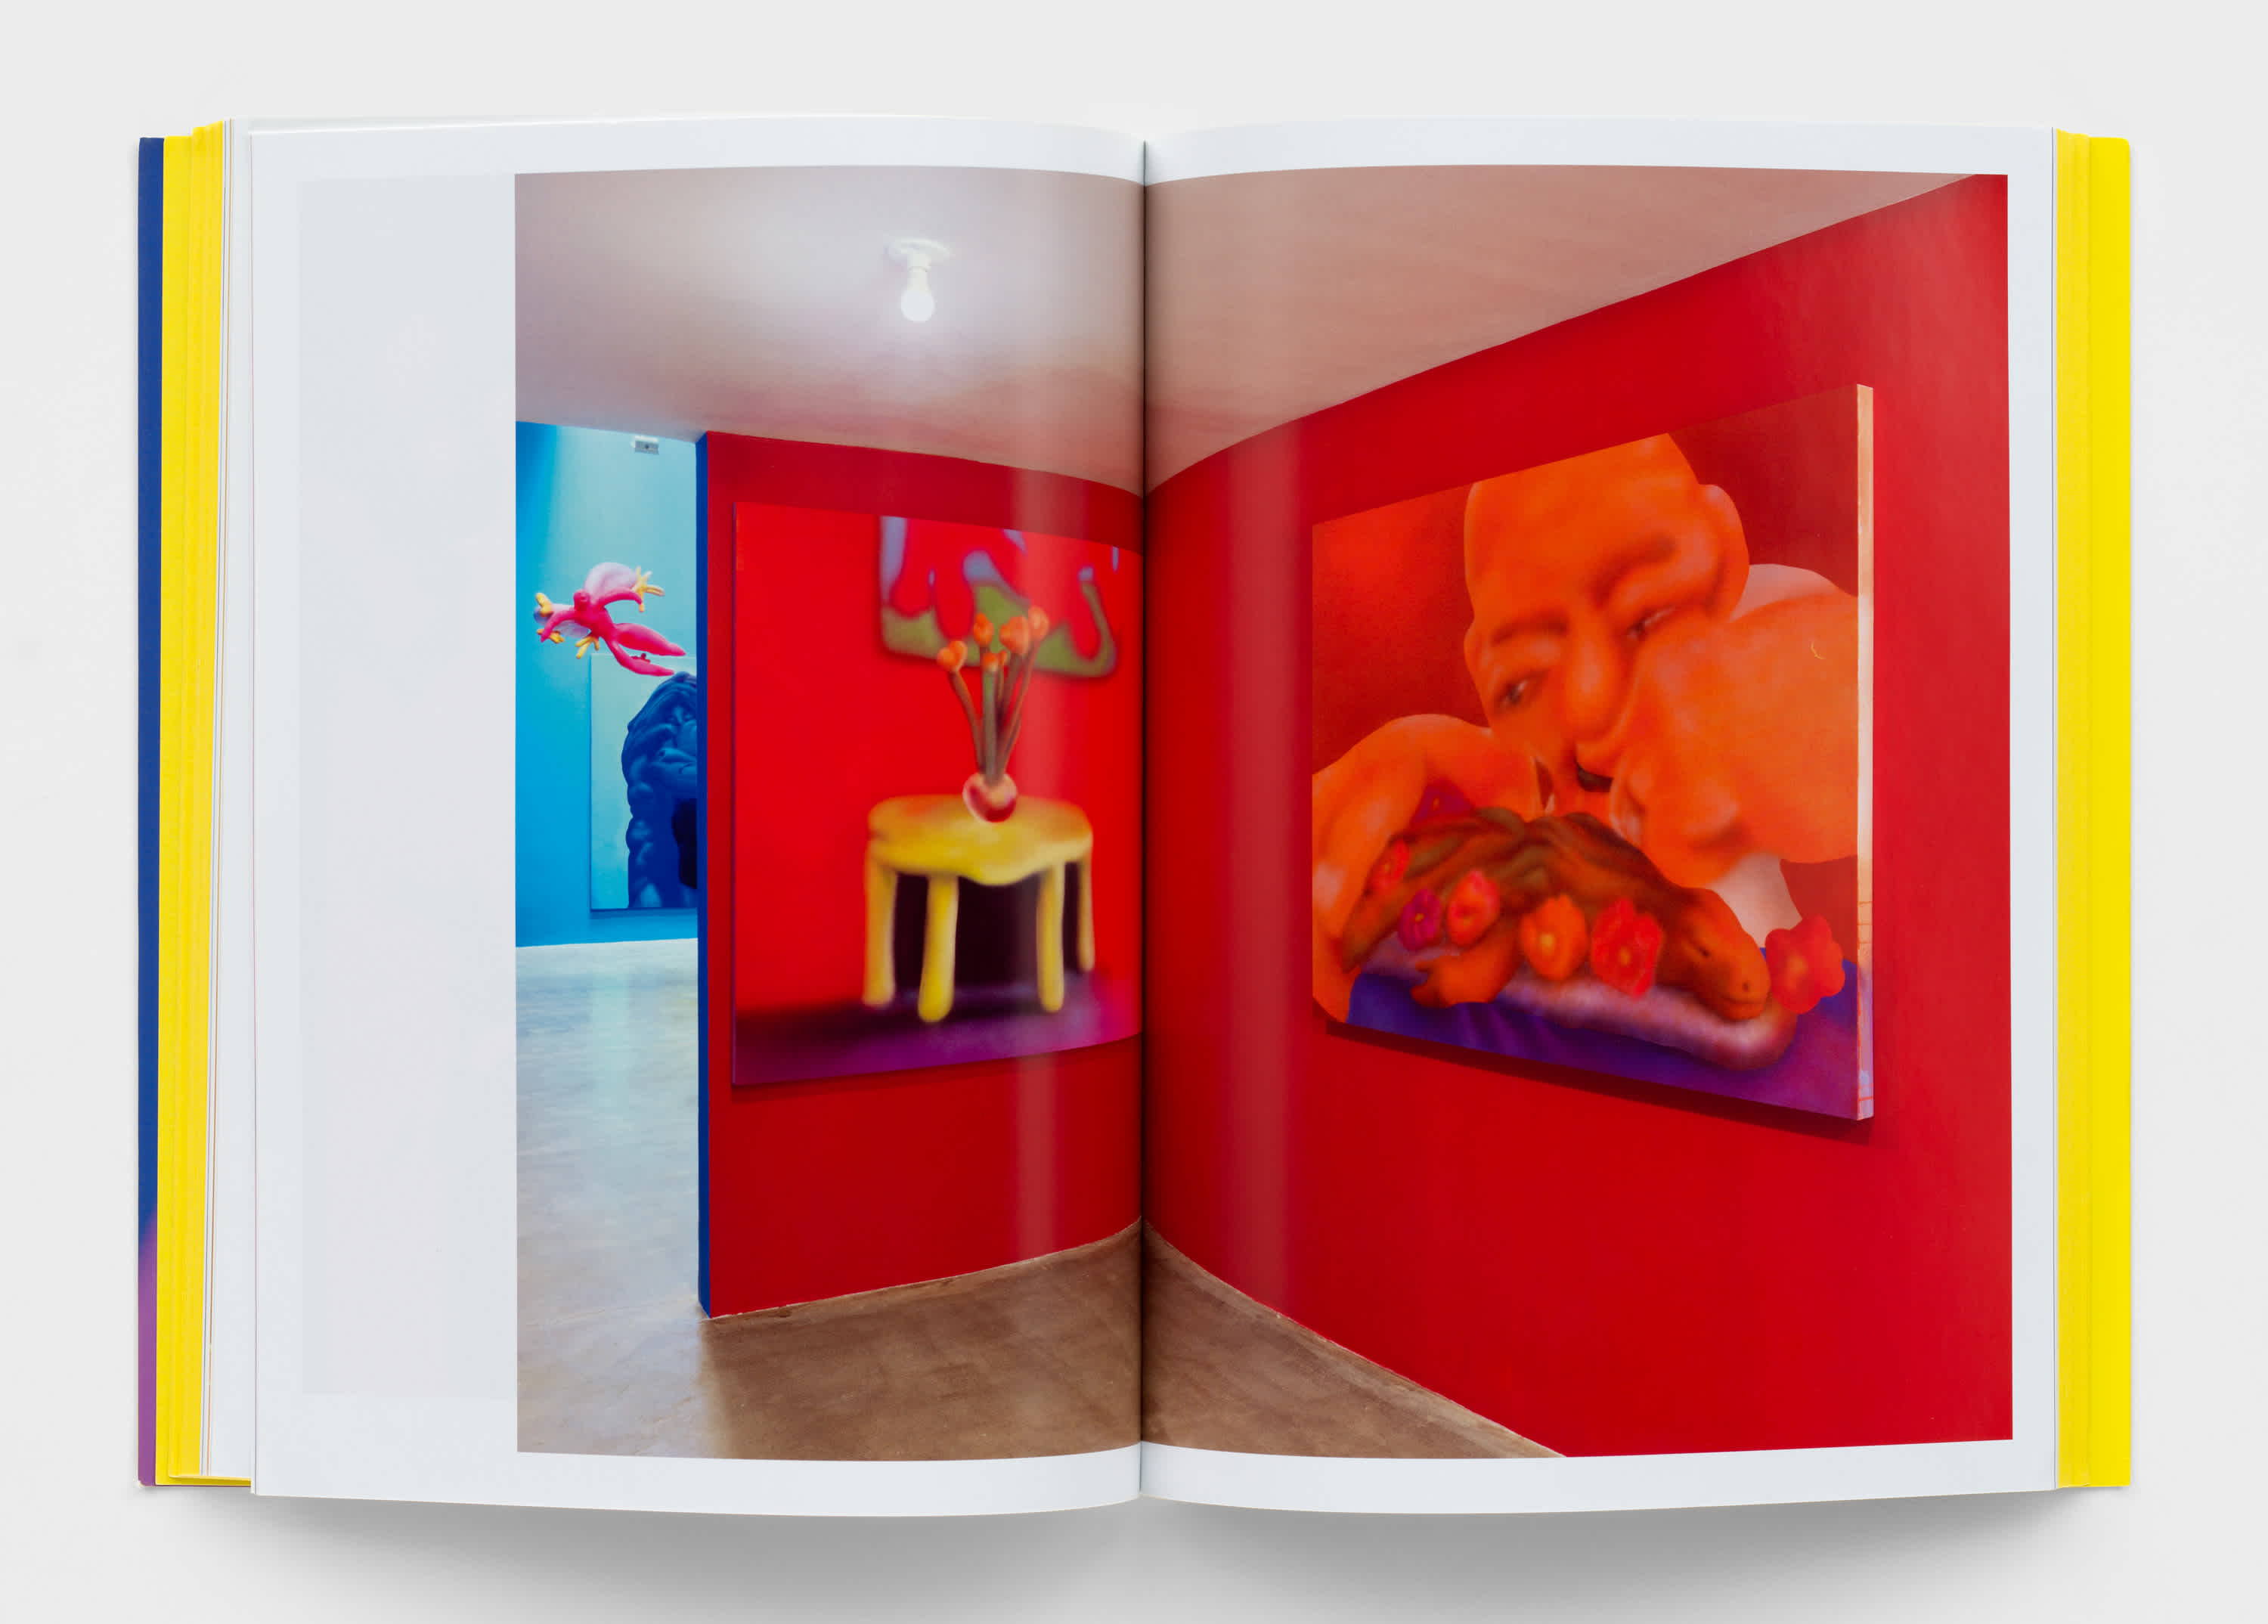 Book interior with a centerfold image of a painting exhibition. Two paintings hang on a red wall in the foreground. In the background a sliver of a painting on a blue wall sticks out. 